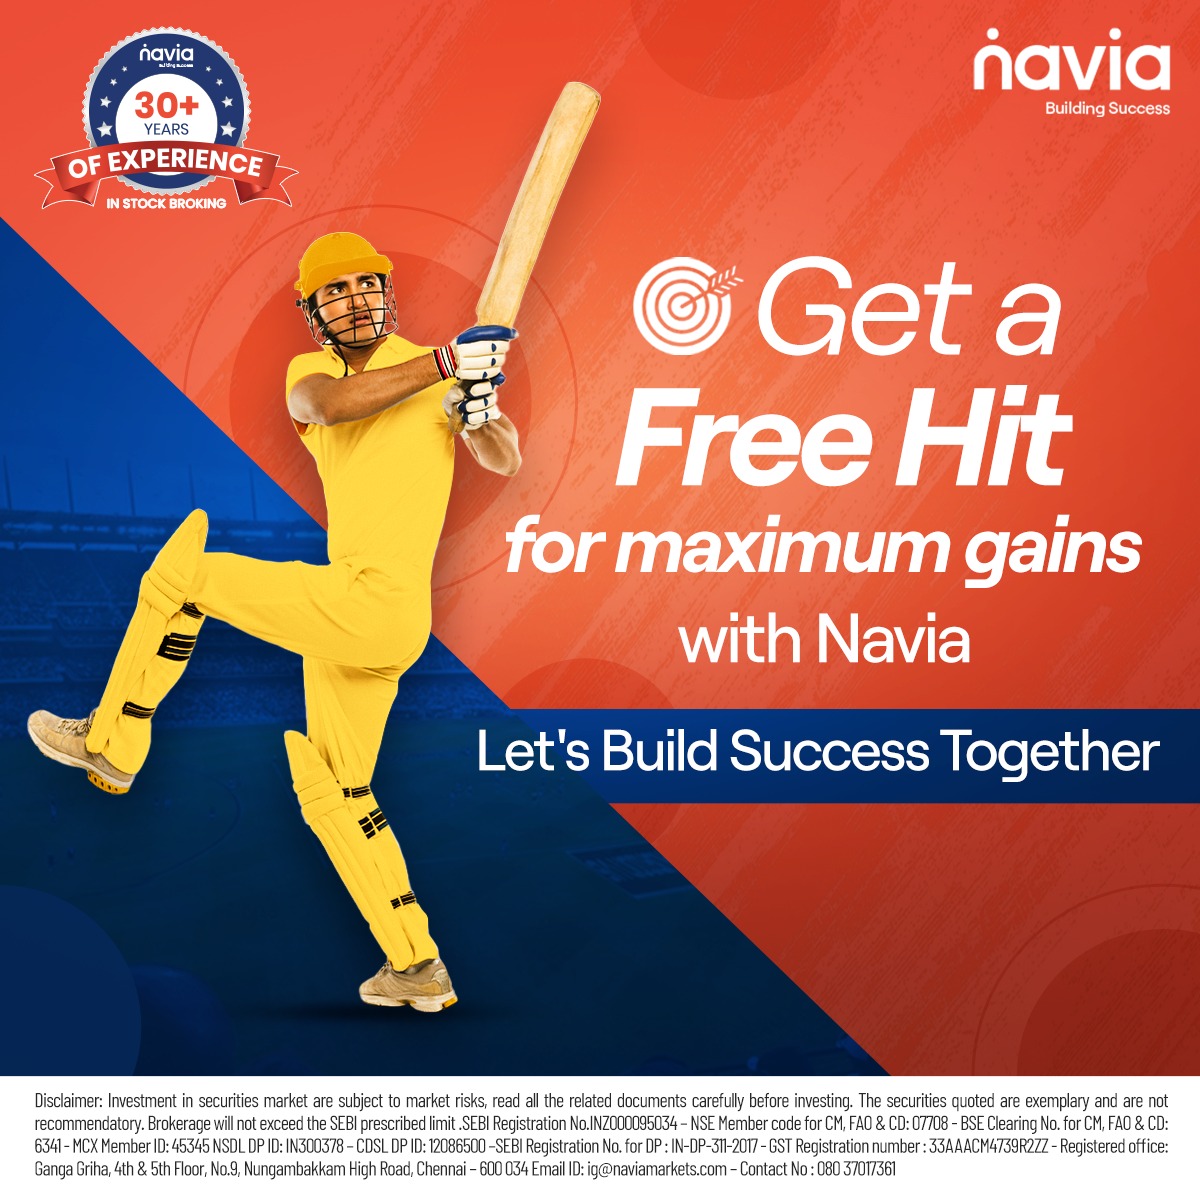 Don't get bowled out by high brokerage in your investment game. Take a Free Hit with Navia's Zero Brokerage plans and stand out with pride! Download the Navia app and start investing today!

#Navia #TrustedTradingPartner #TradeSmart #FinancialFreedom #InvestingJourney